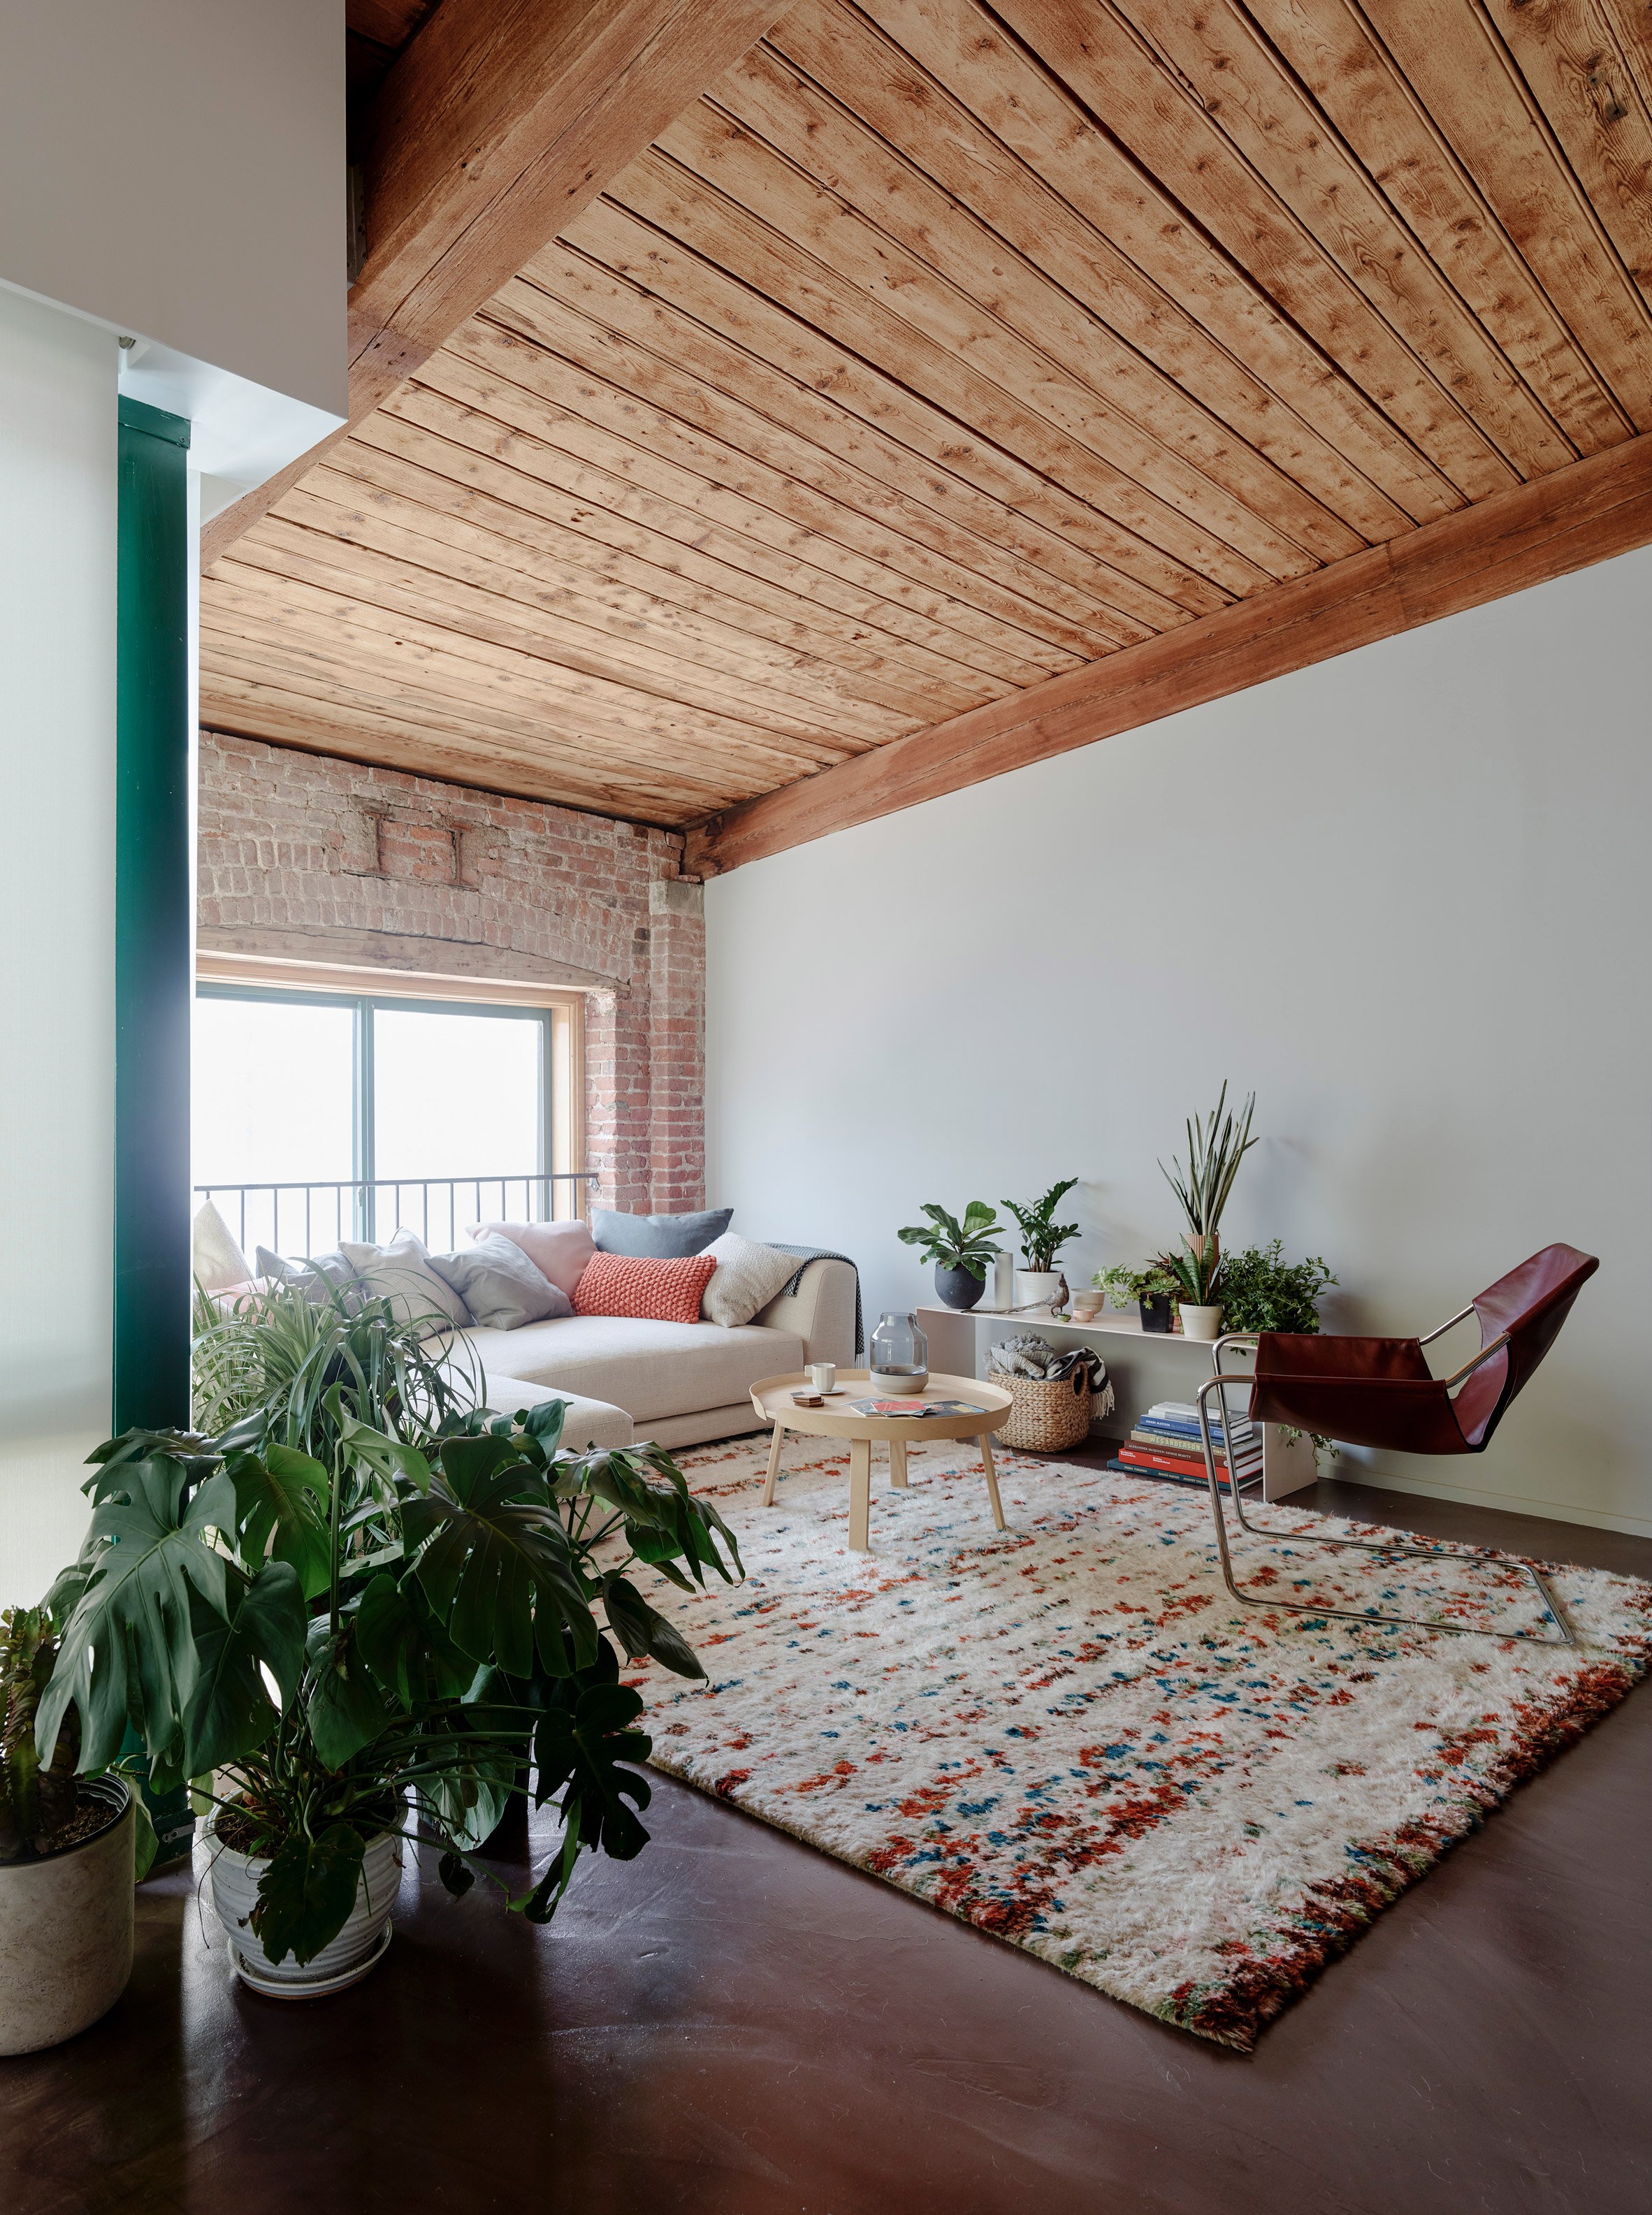 The designers saved and highlighted the original features like a brick clad or wooden beams in this living room